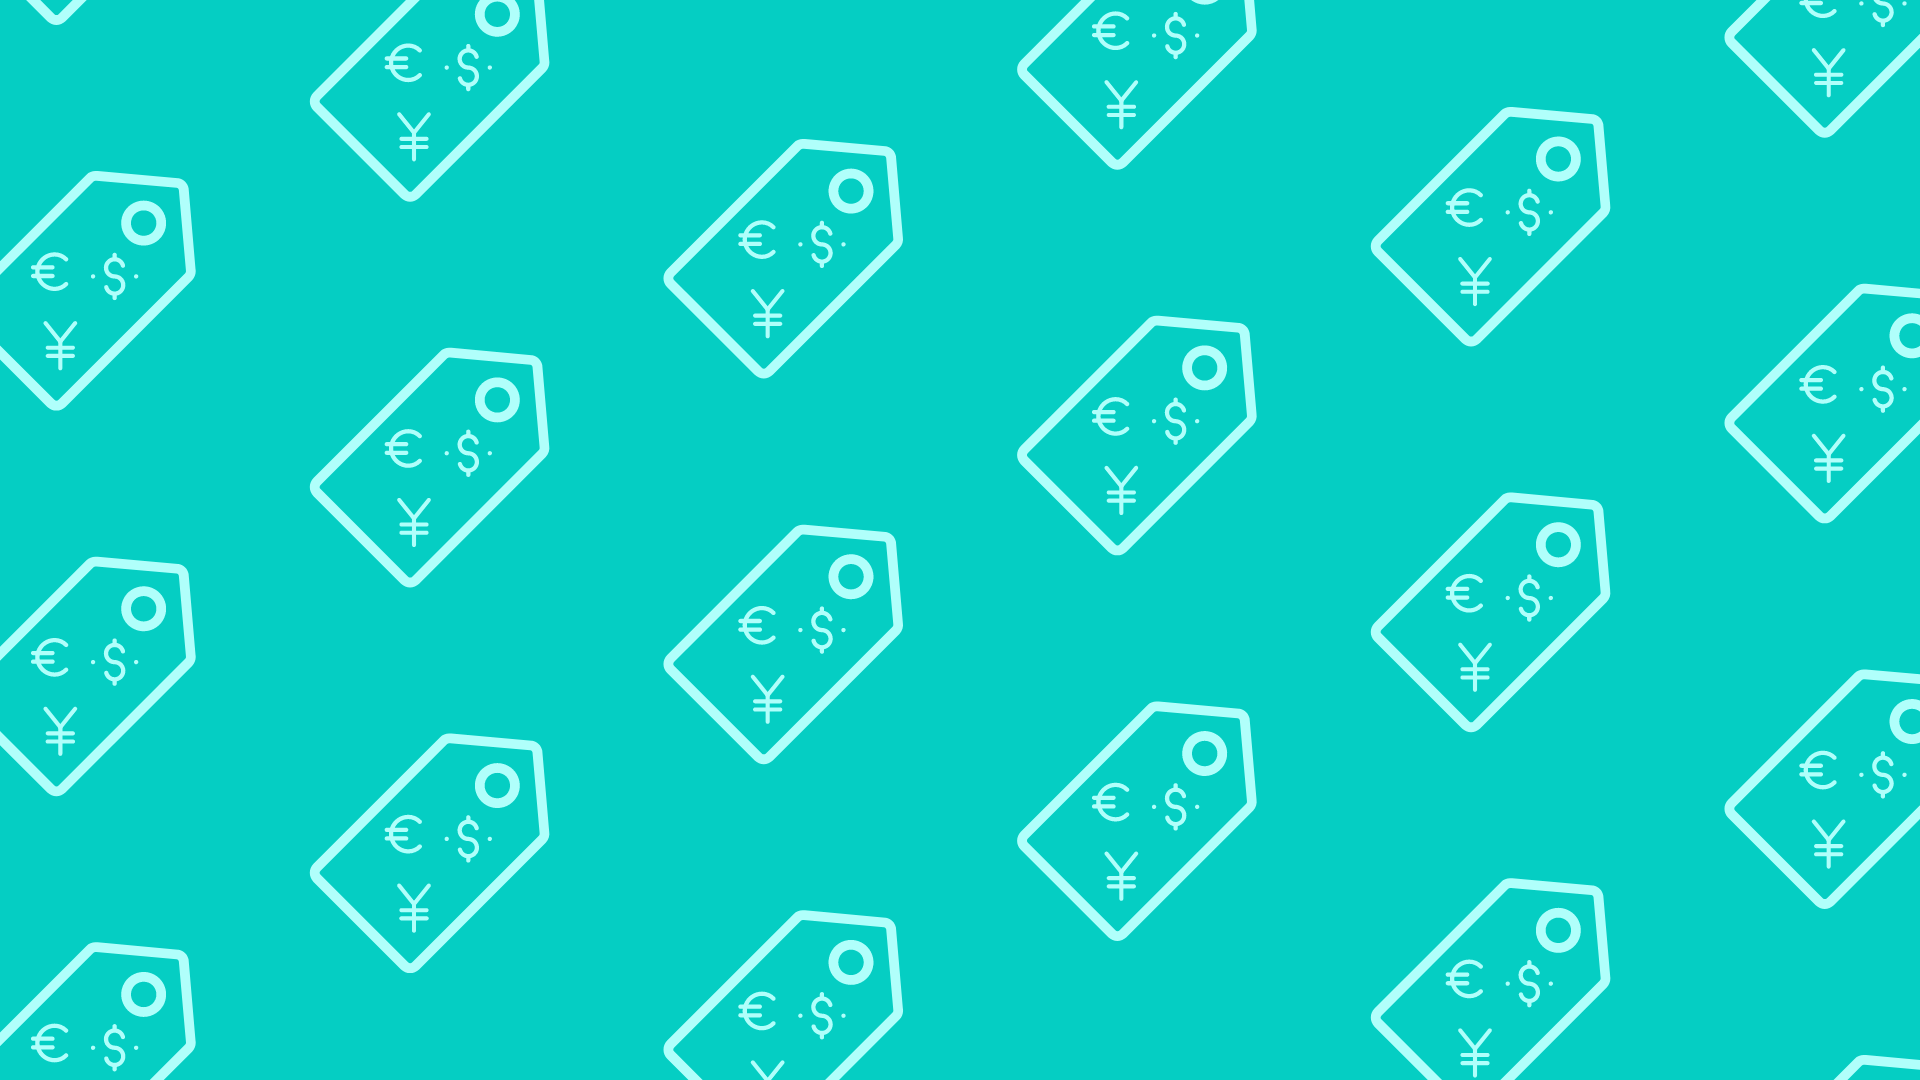 illustrated price tags to represent pricing and payments